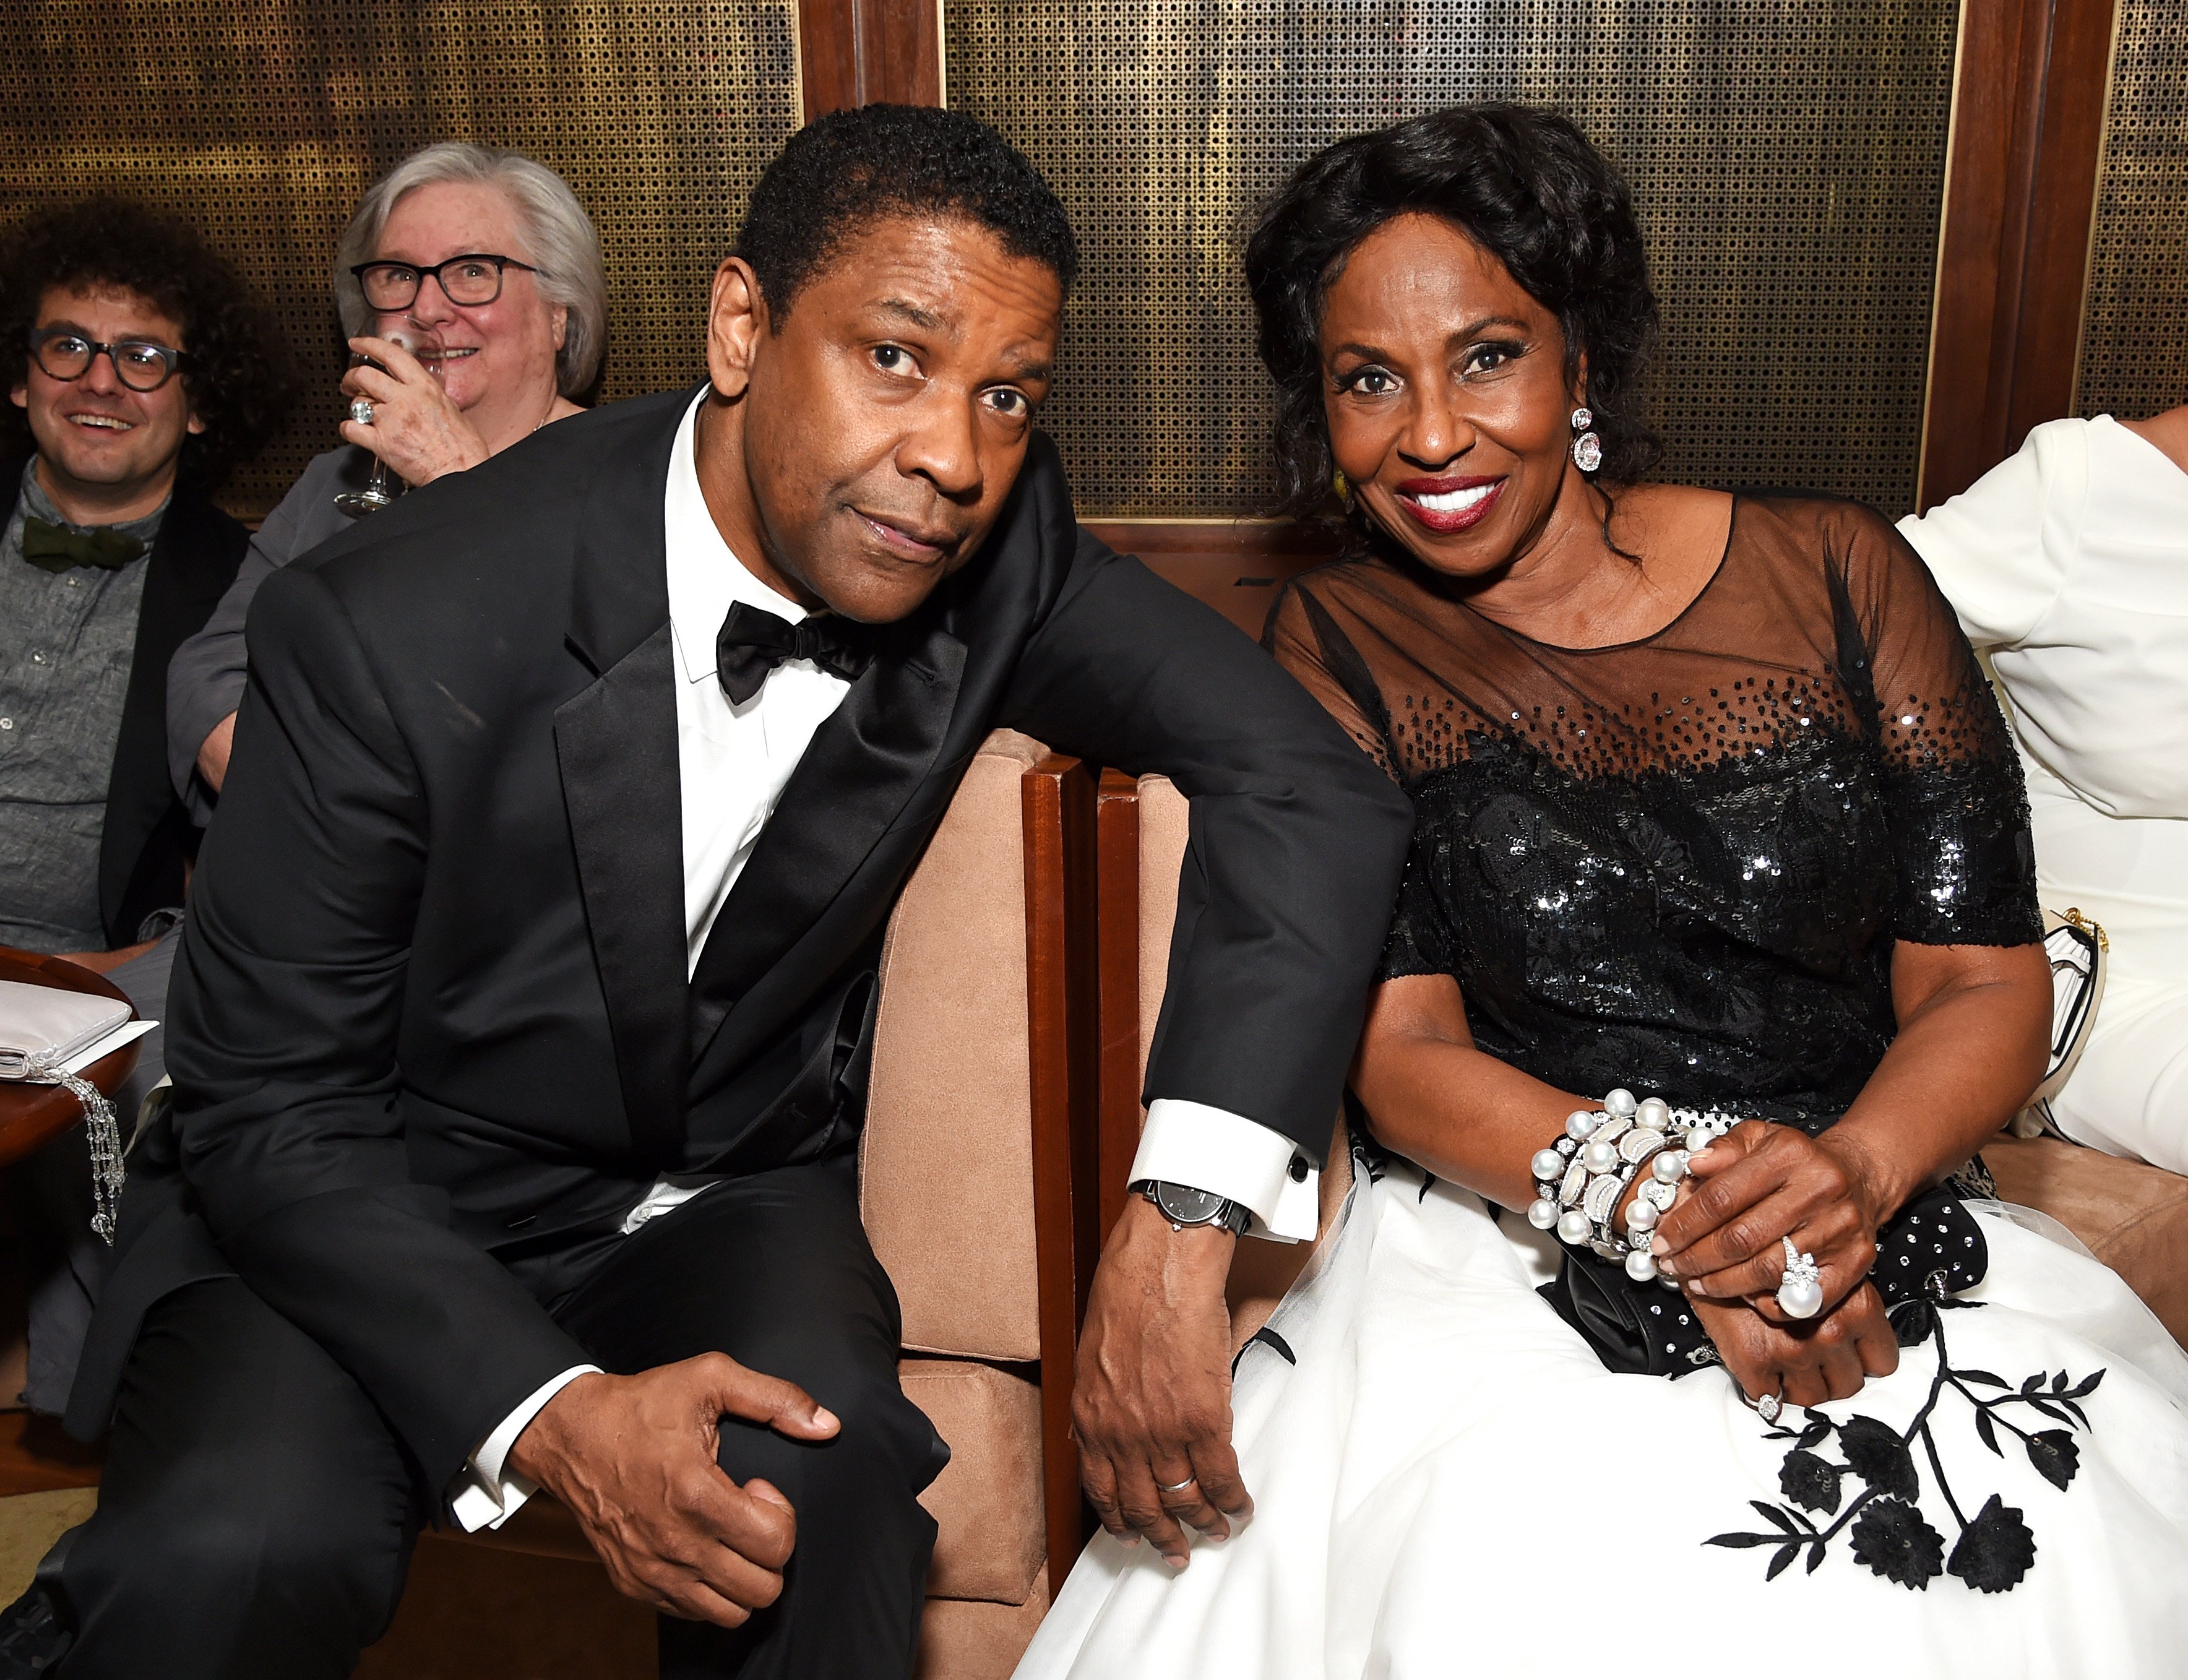 Denzel Washington and Pauletta Washington attend the 47th AFI Life Achievement Award Honoring Denzel Washington After Party at Sunset Tower Hotel on June 06, 2019 in Hollywood, California. | Photo: GettyImages